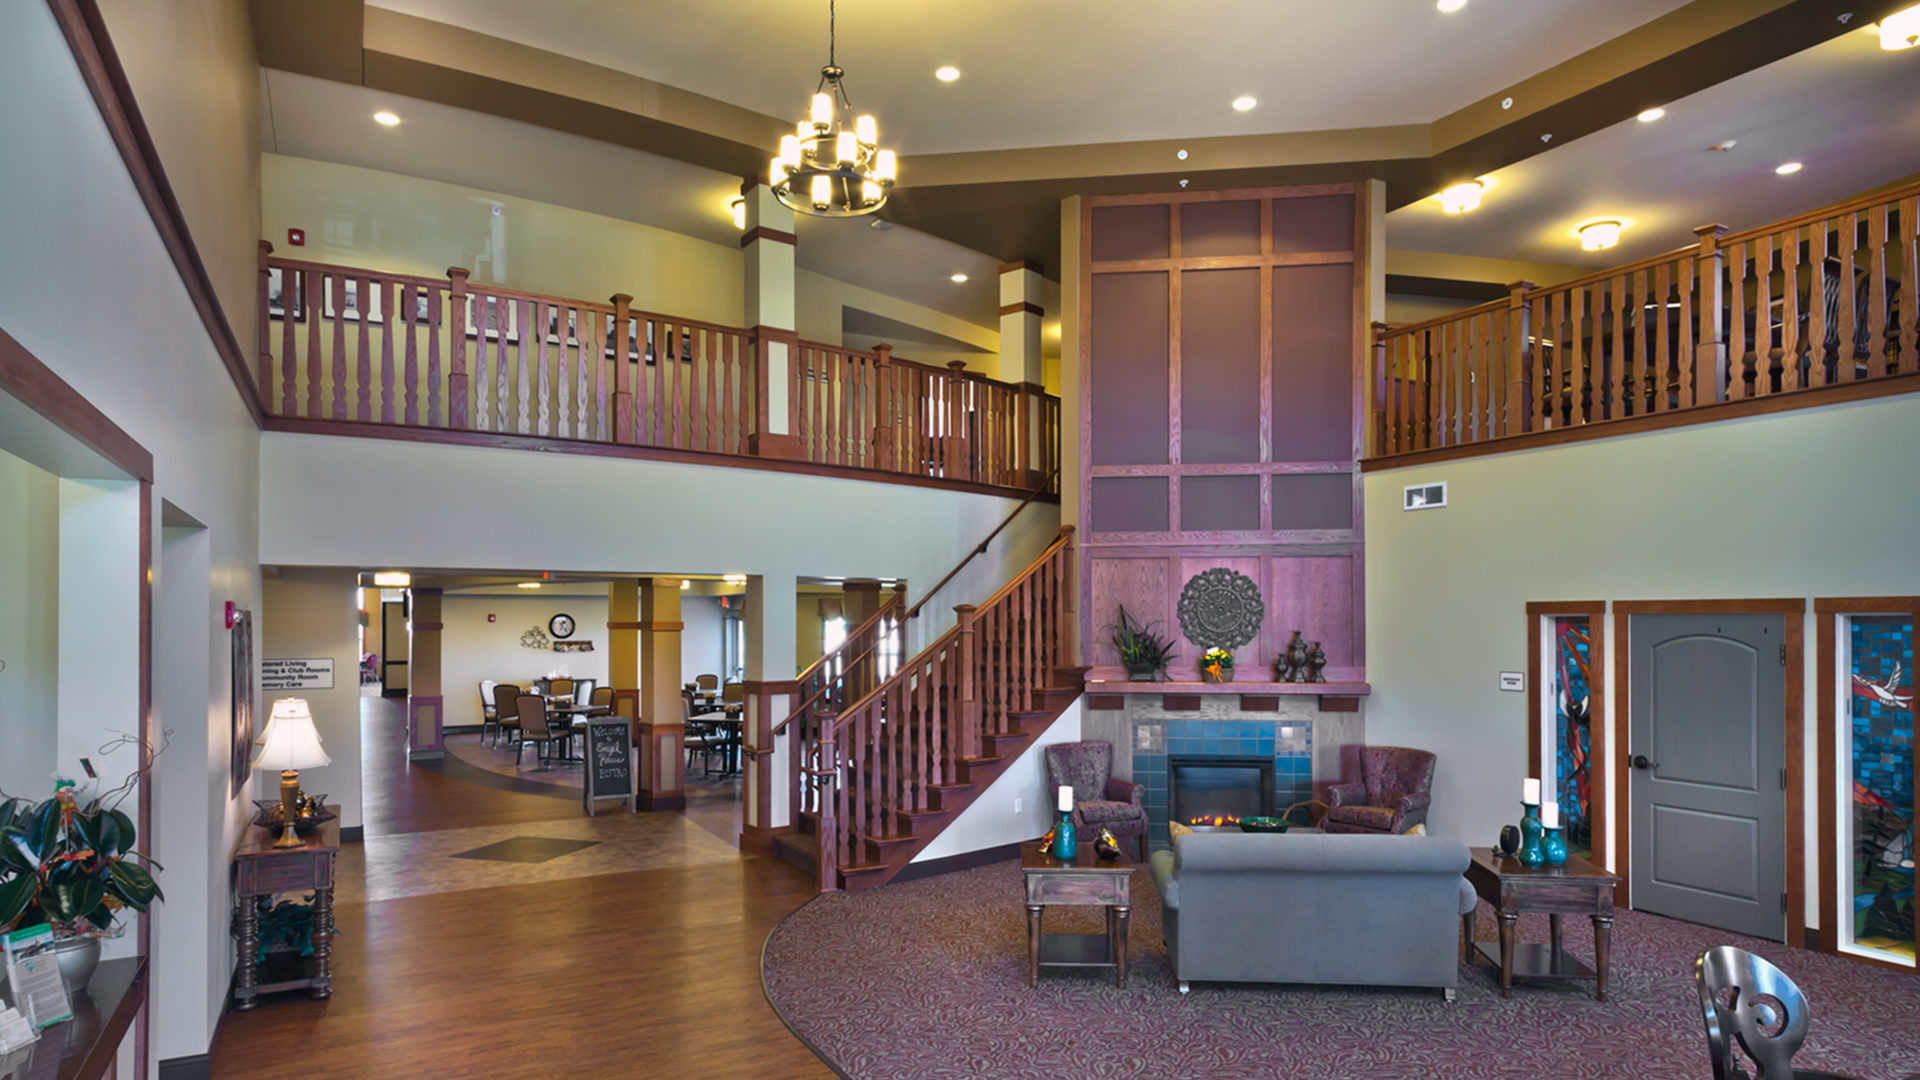 Engel Haus Senior Housing Interior Two Story Lobby Seating Area with Fireplace